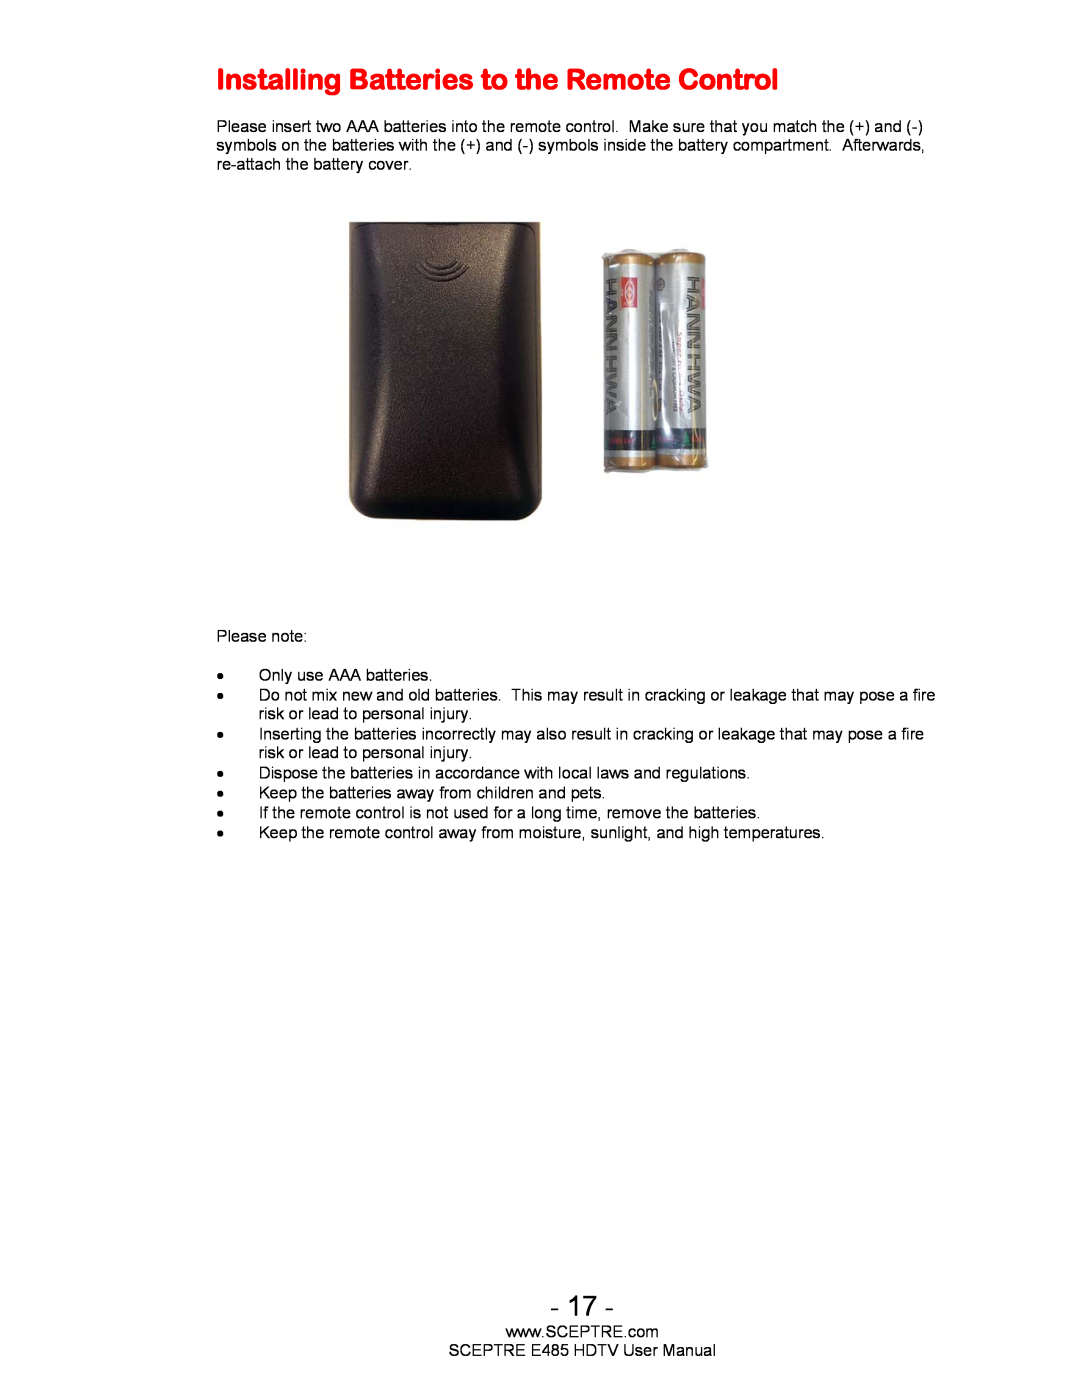 Sceptre Technologies E485 user manual Installing Batteries to the Remote Control 